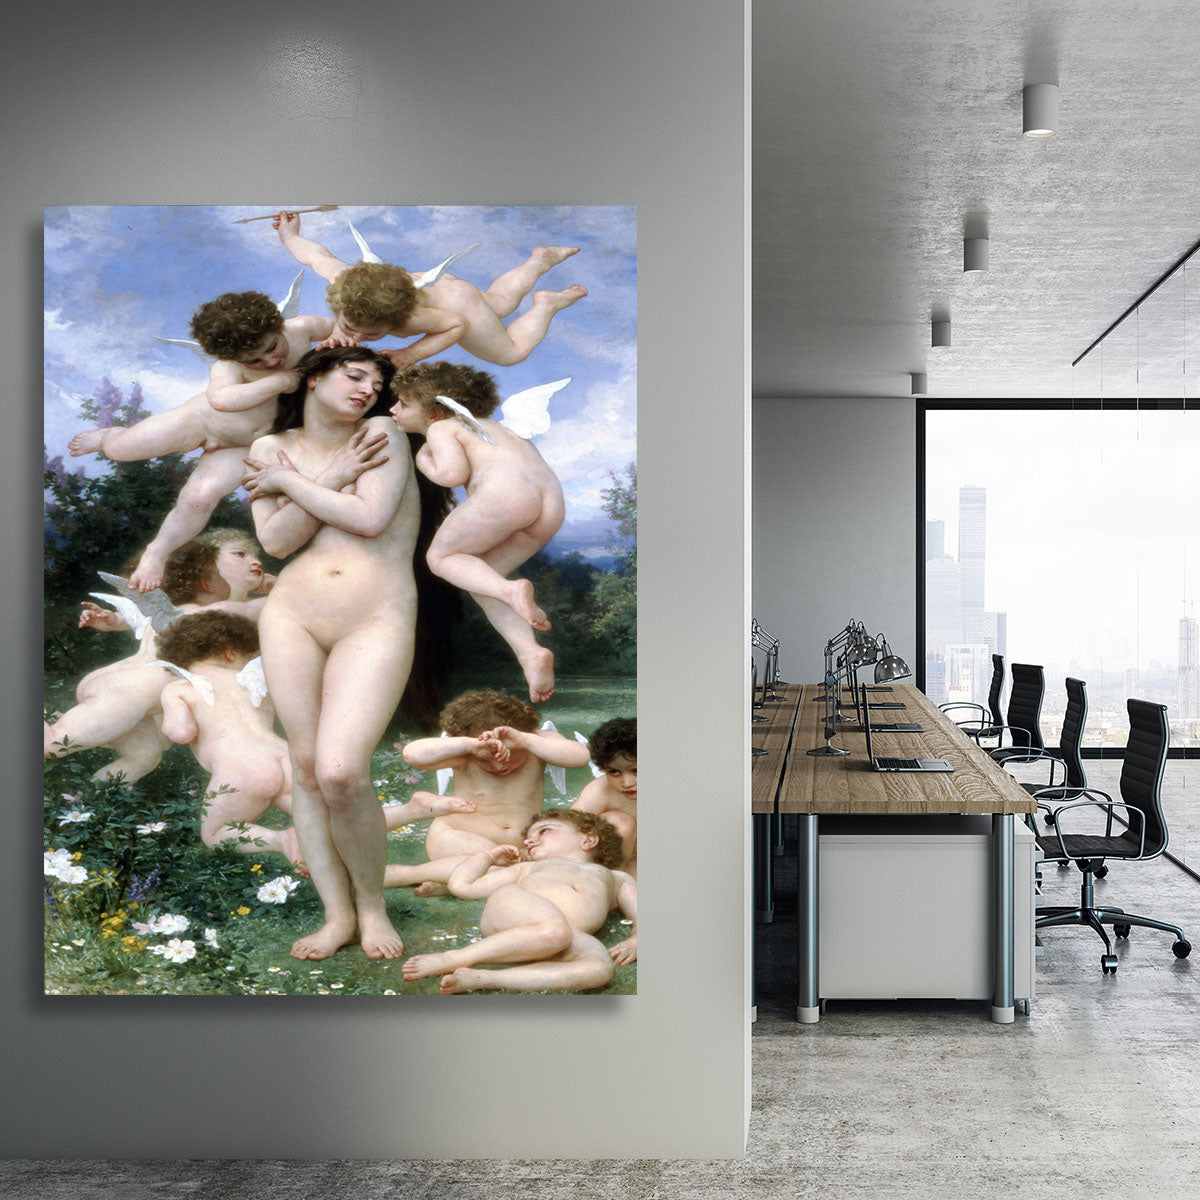 Return of Spring By Bouguereau Canvas Print or Poster - Canvas Art Rocks - 3